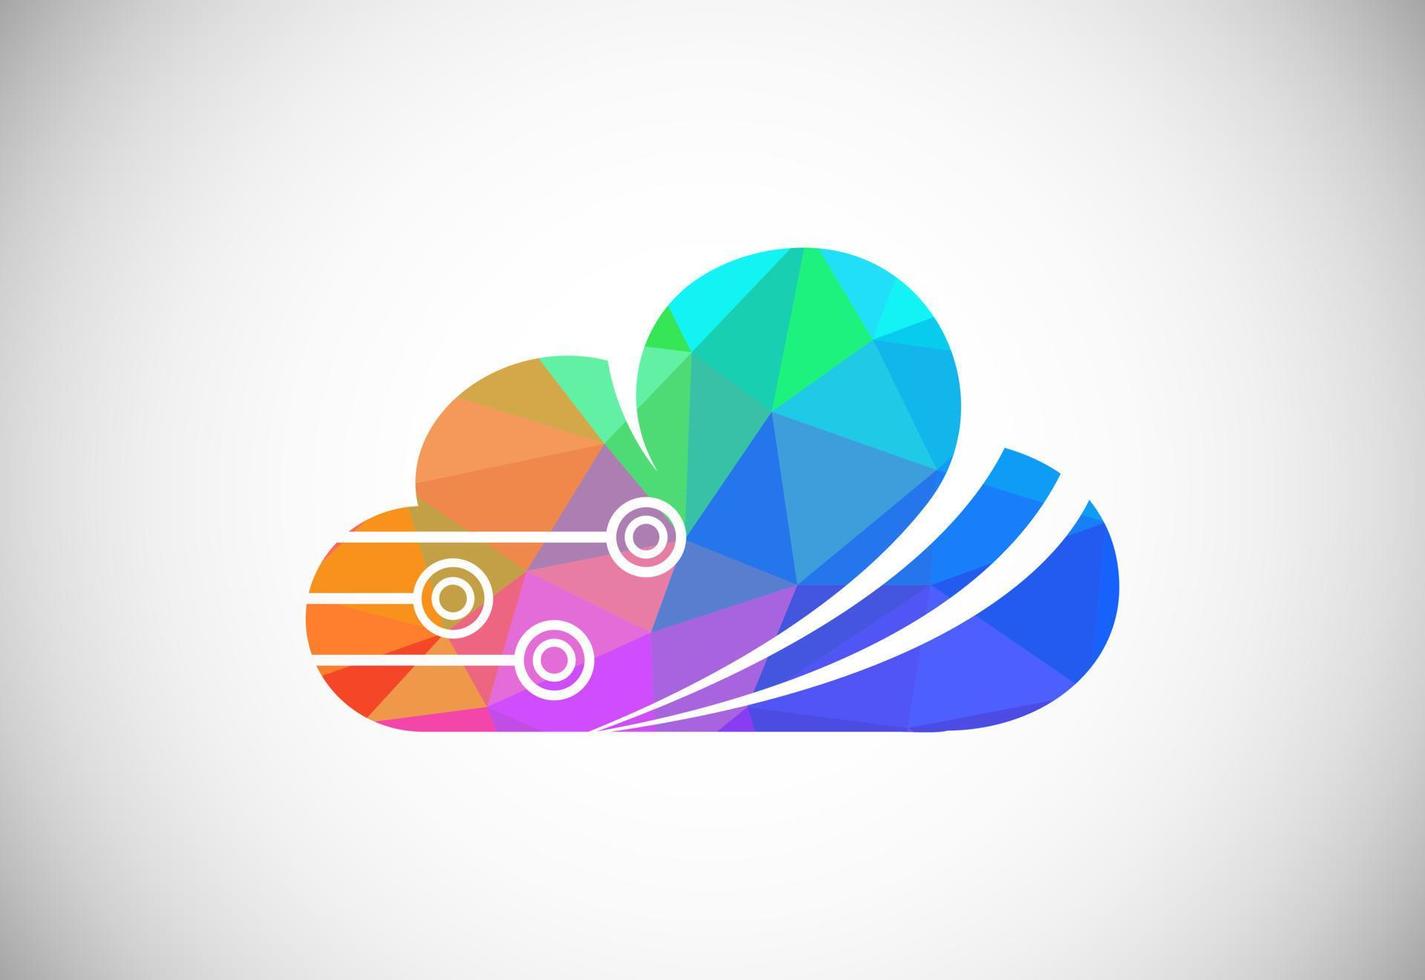 Polygonal low poly cloud computing logo. Colorful abstract triangles style cloud icon. vector